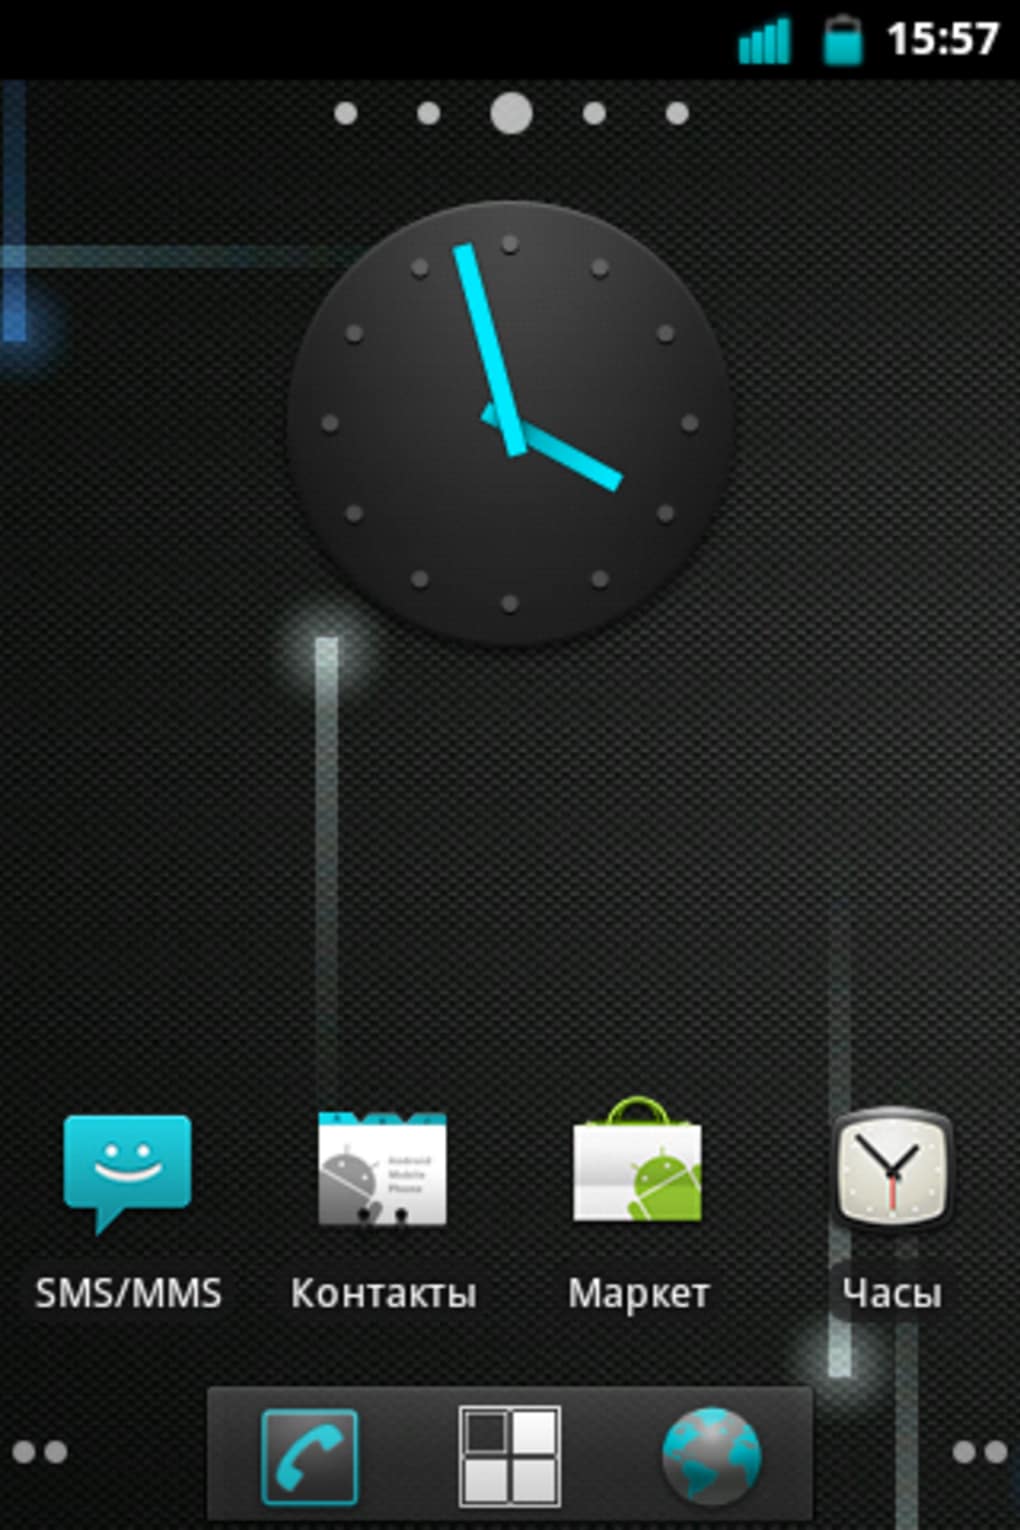 Download cyanogenmod for android 2.1 3